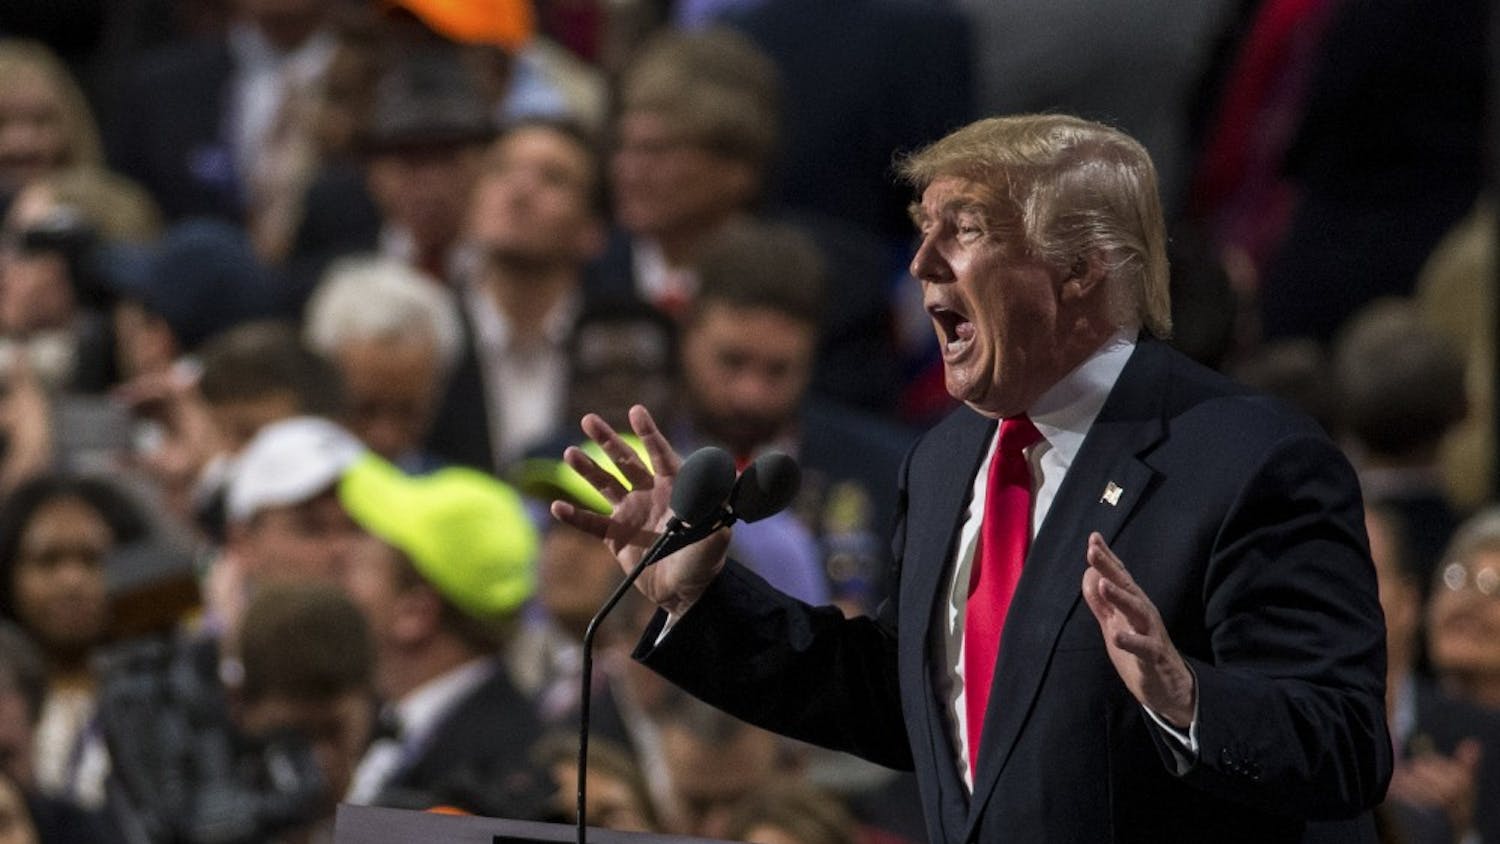 Republican presidential nominee Donald Trump speaks last Thursday at the Quicken Loans Arena in Cleaveland, Ohio.